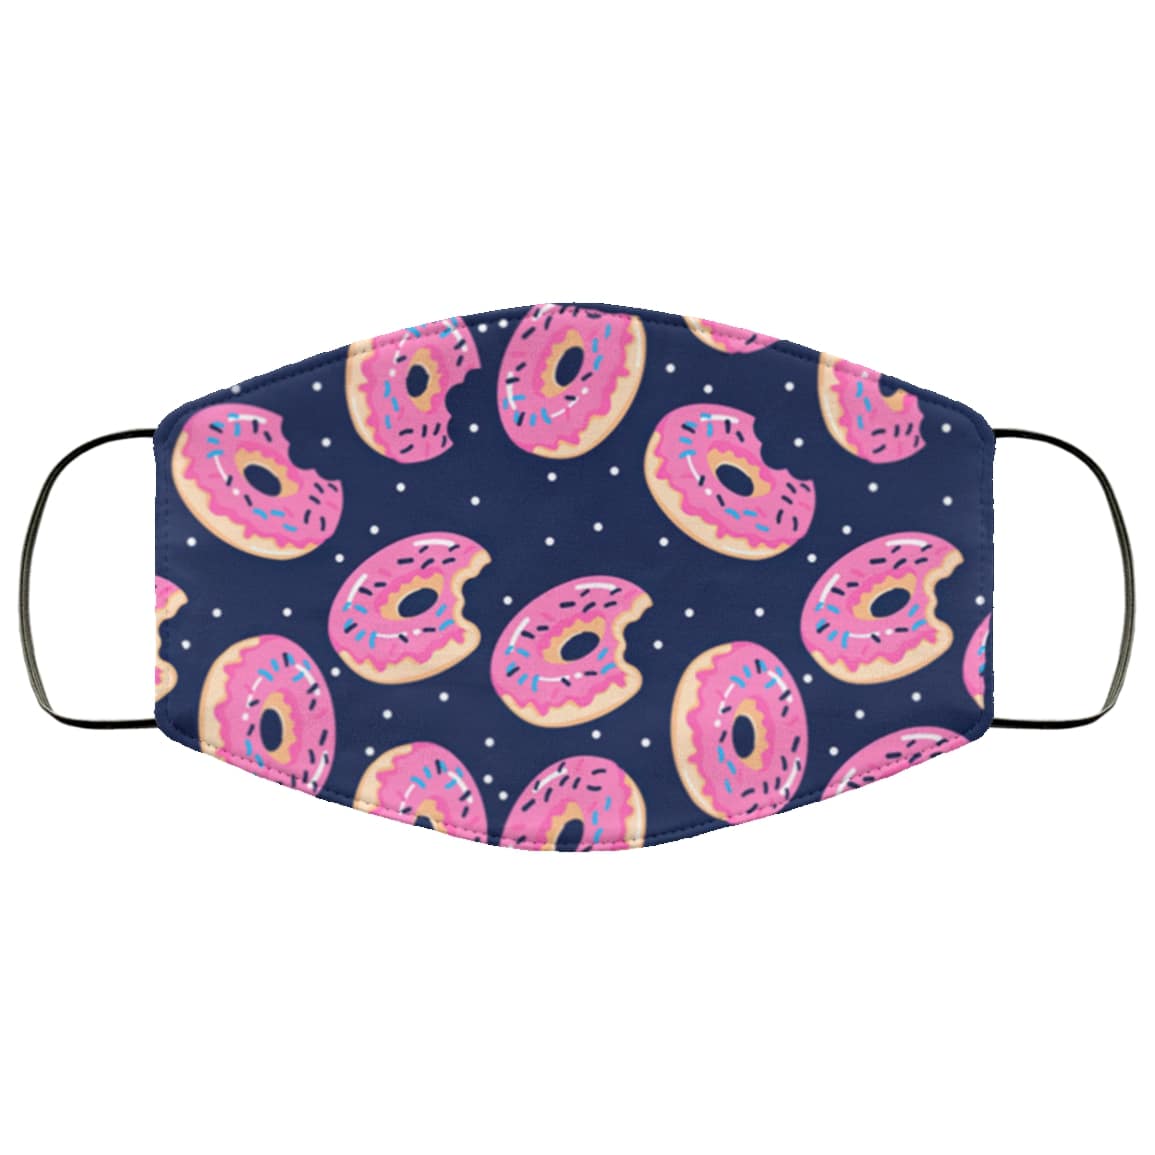 Pink donut all over printed face mask 1